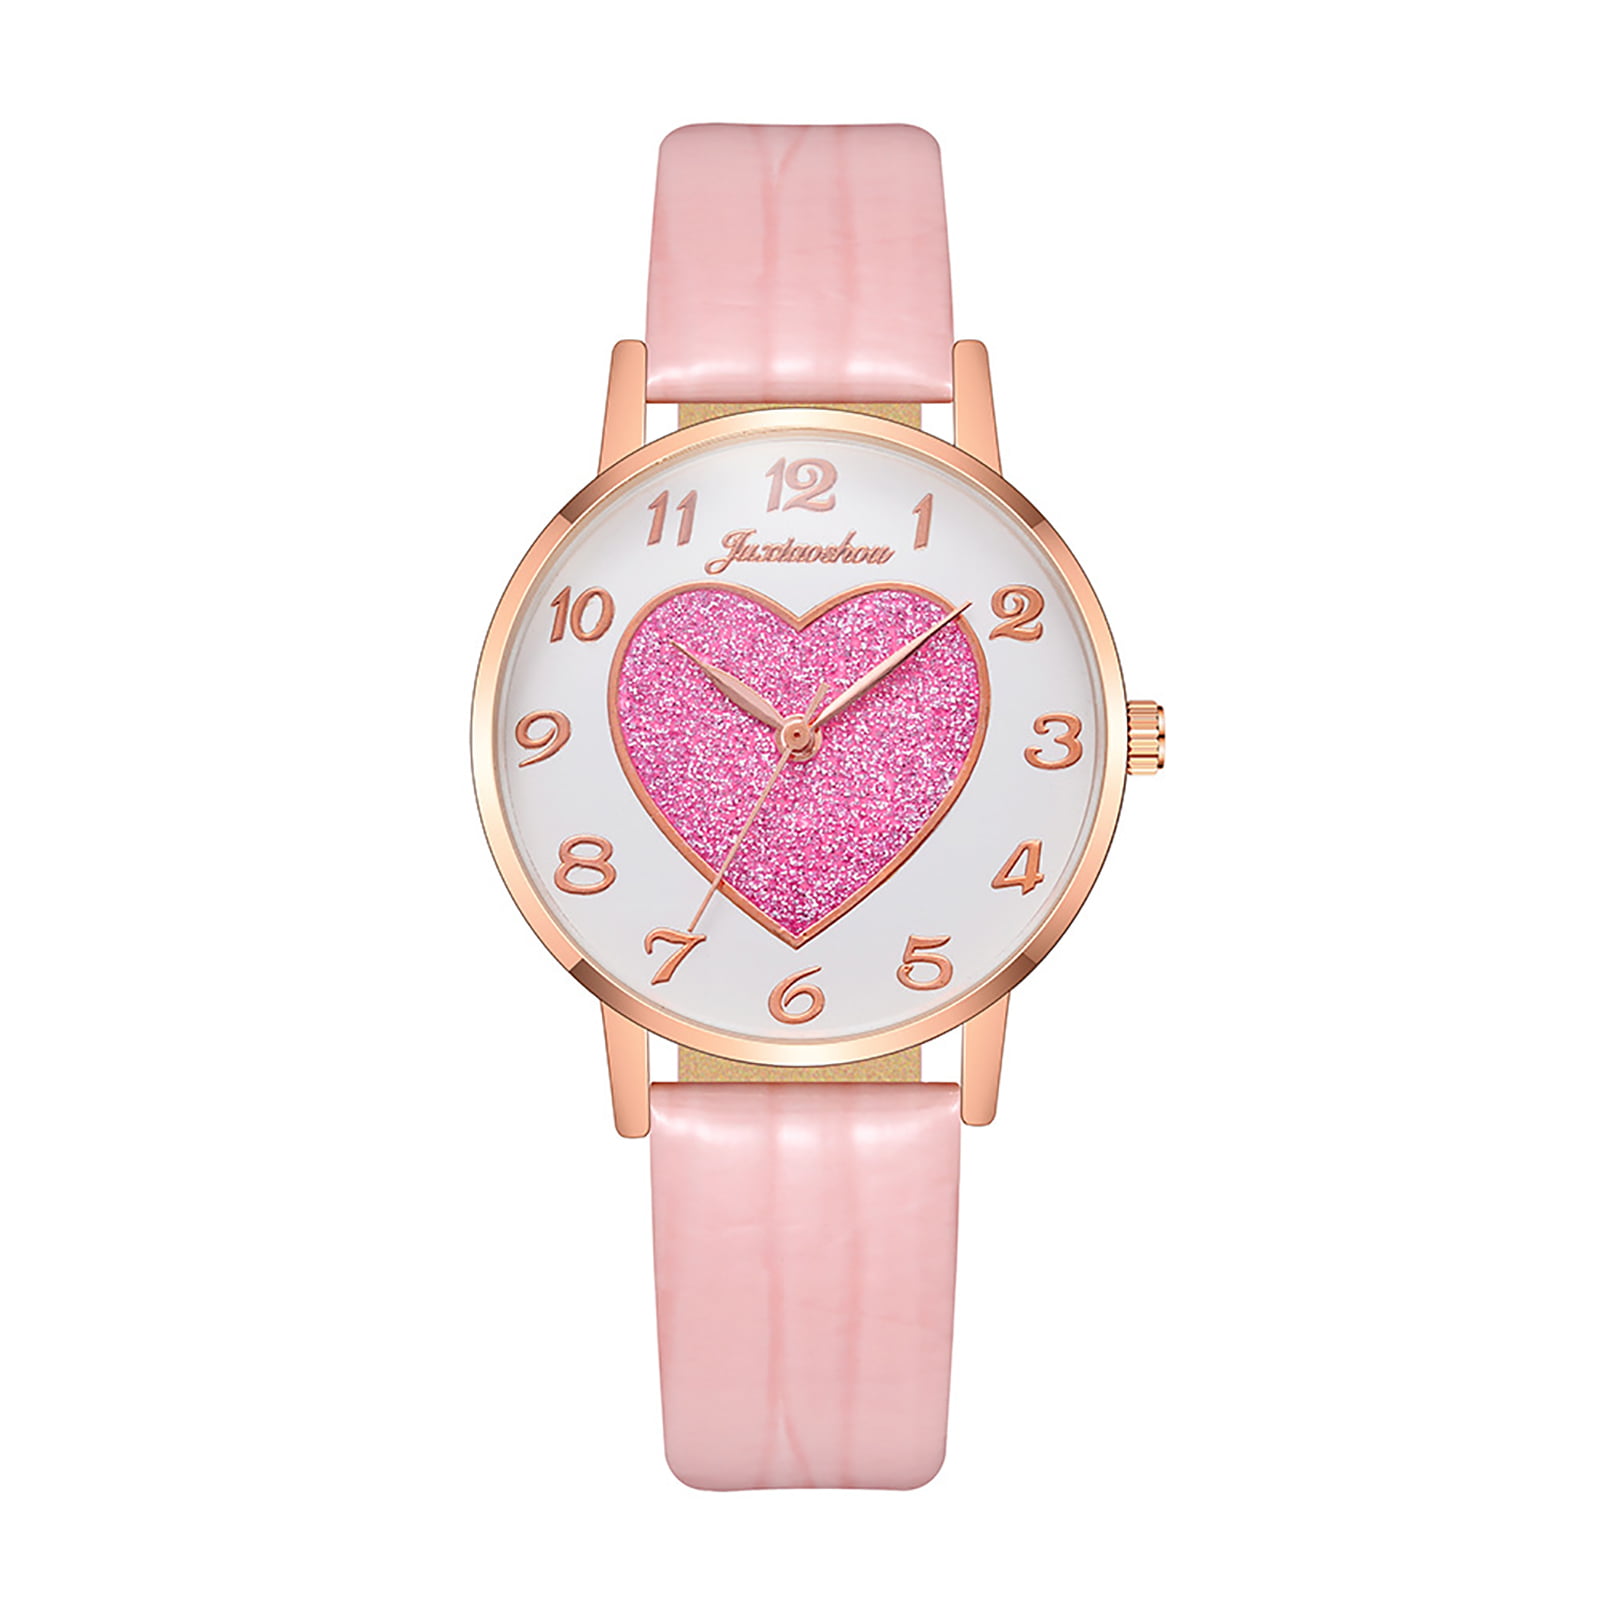 Heart Shaped Watches 